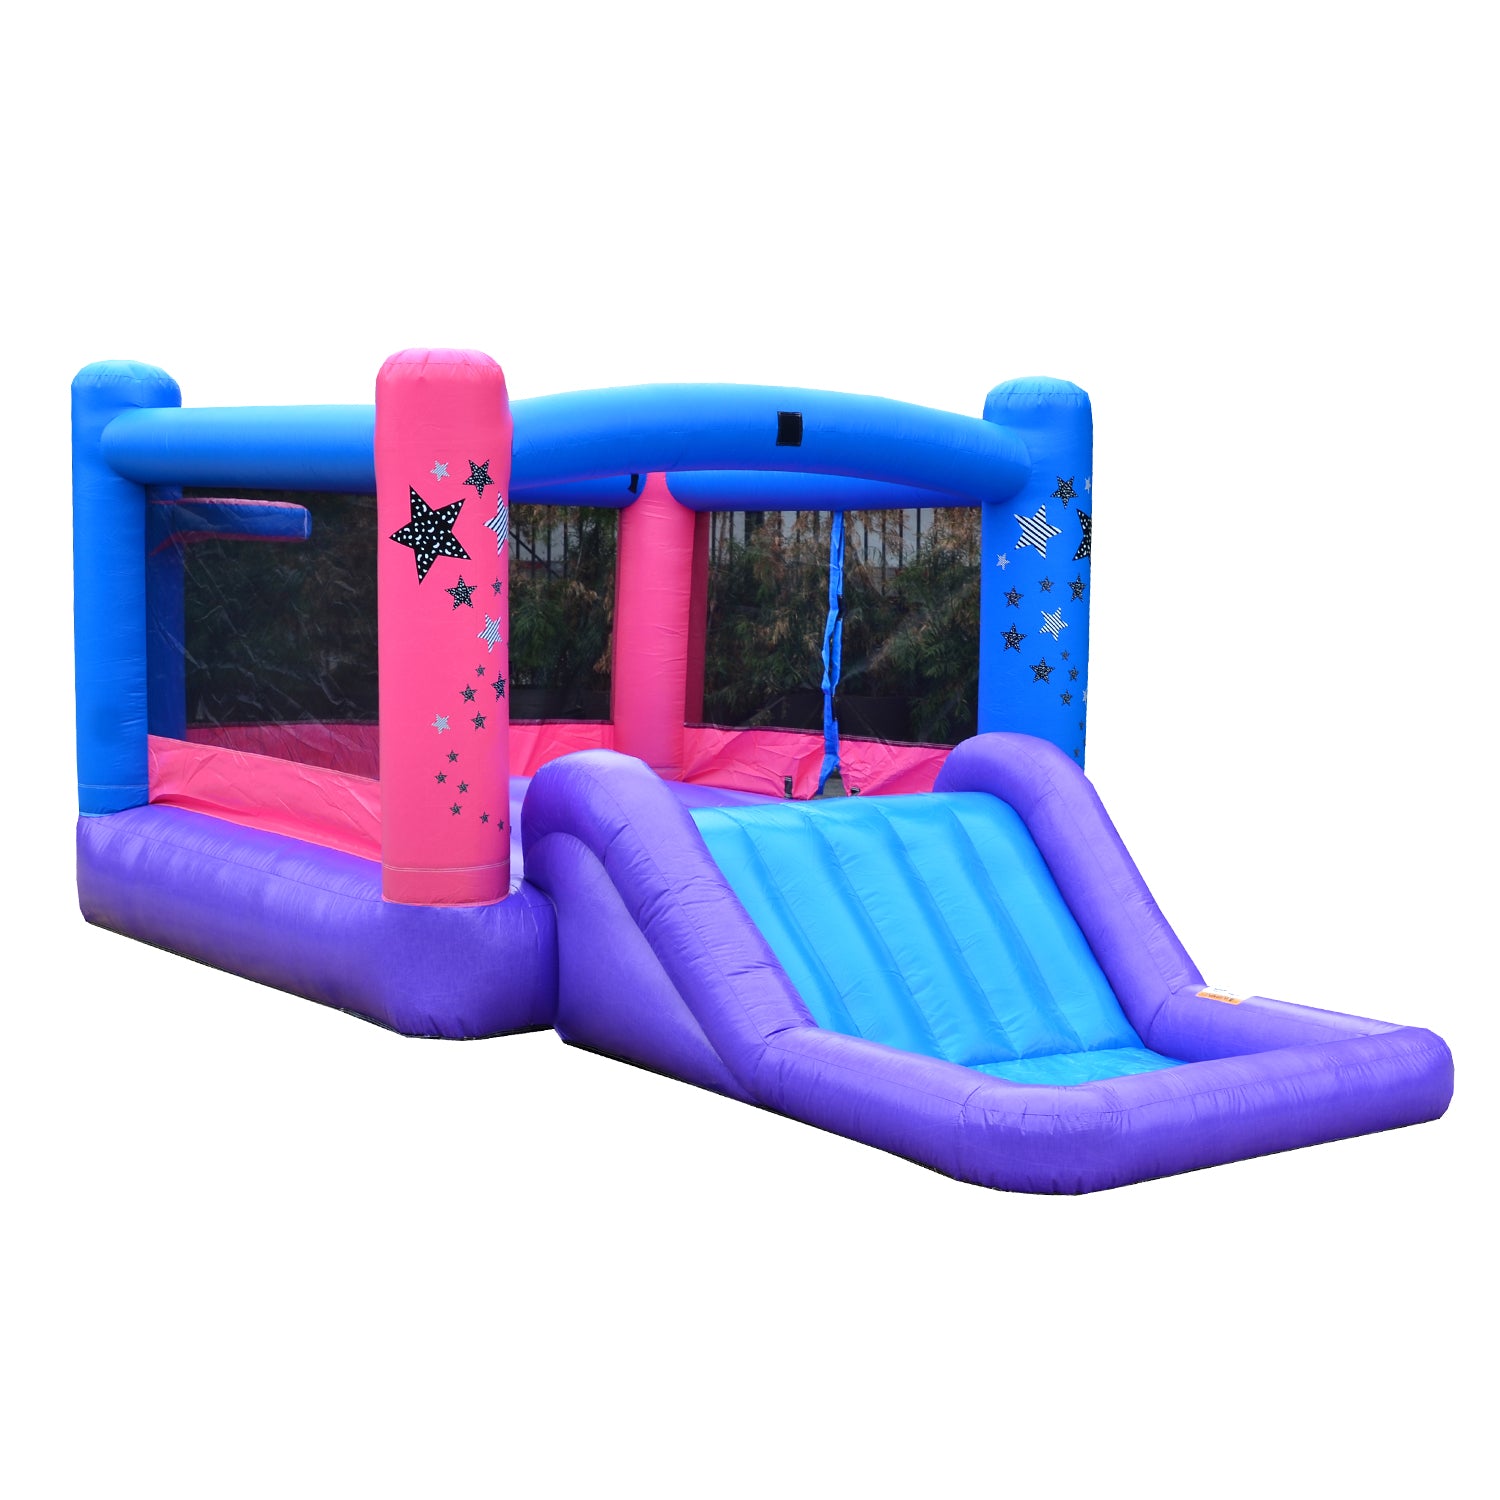 buy direct lighweight rental grade bounce house inflatable slide with pool dream girl design in blue and purple